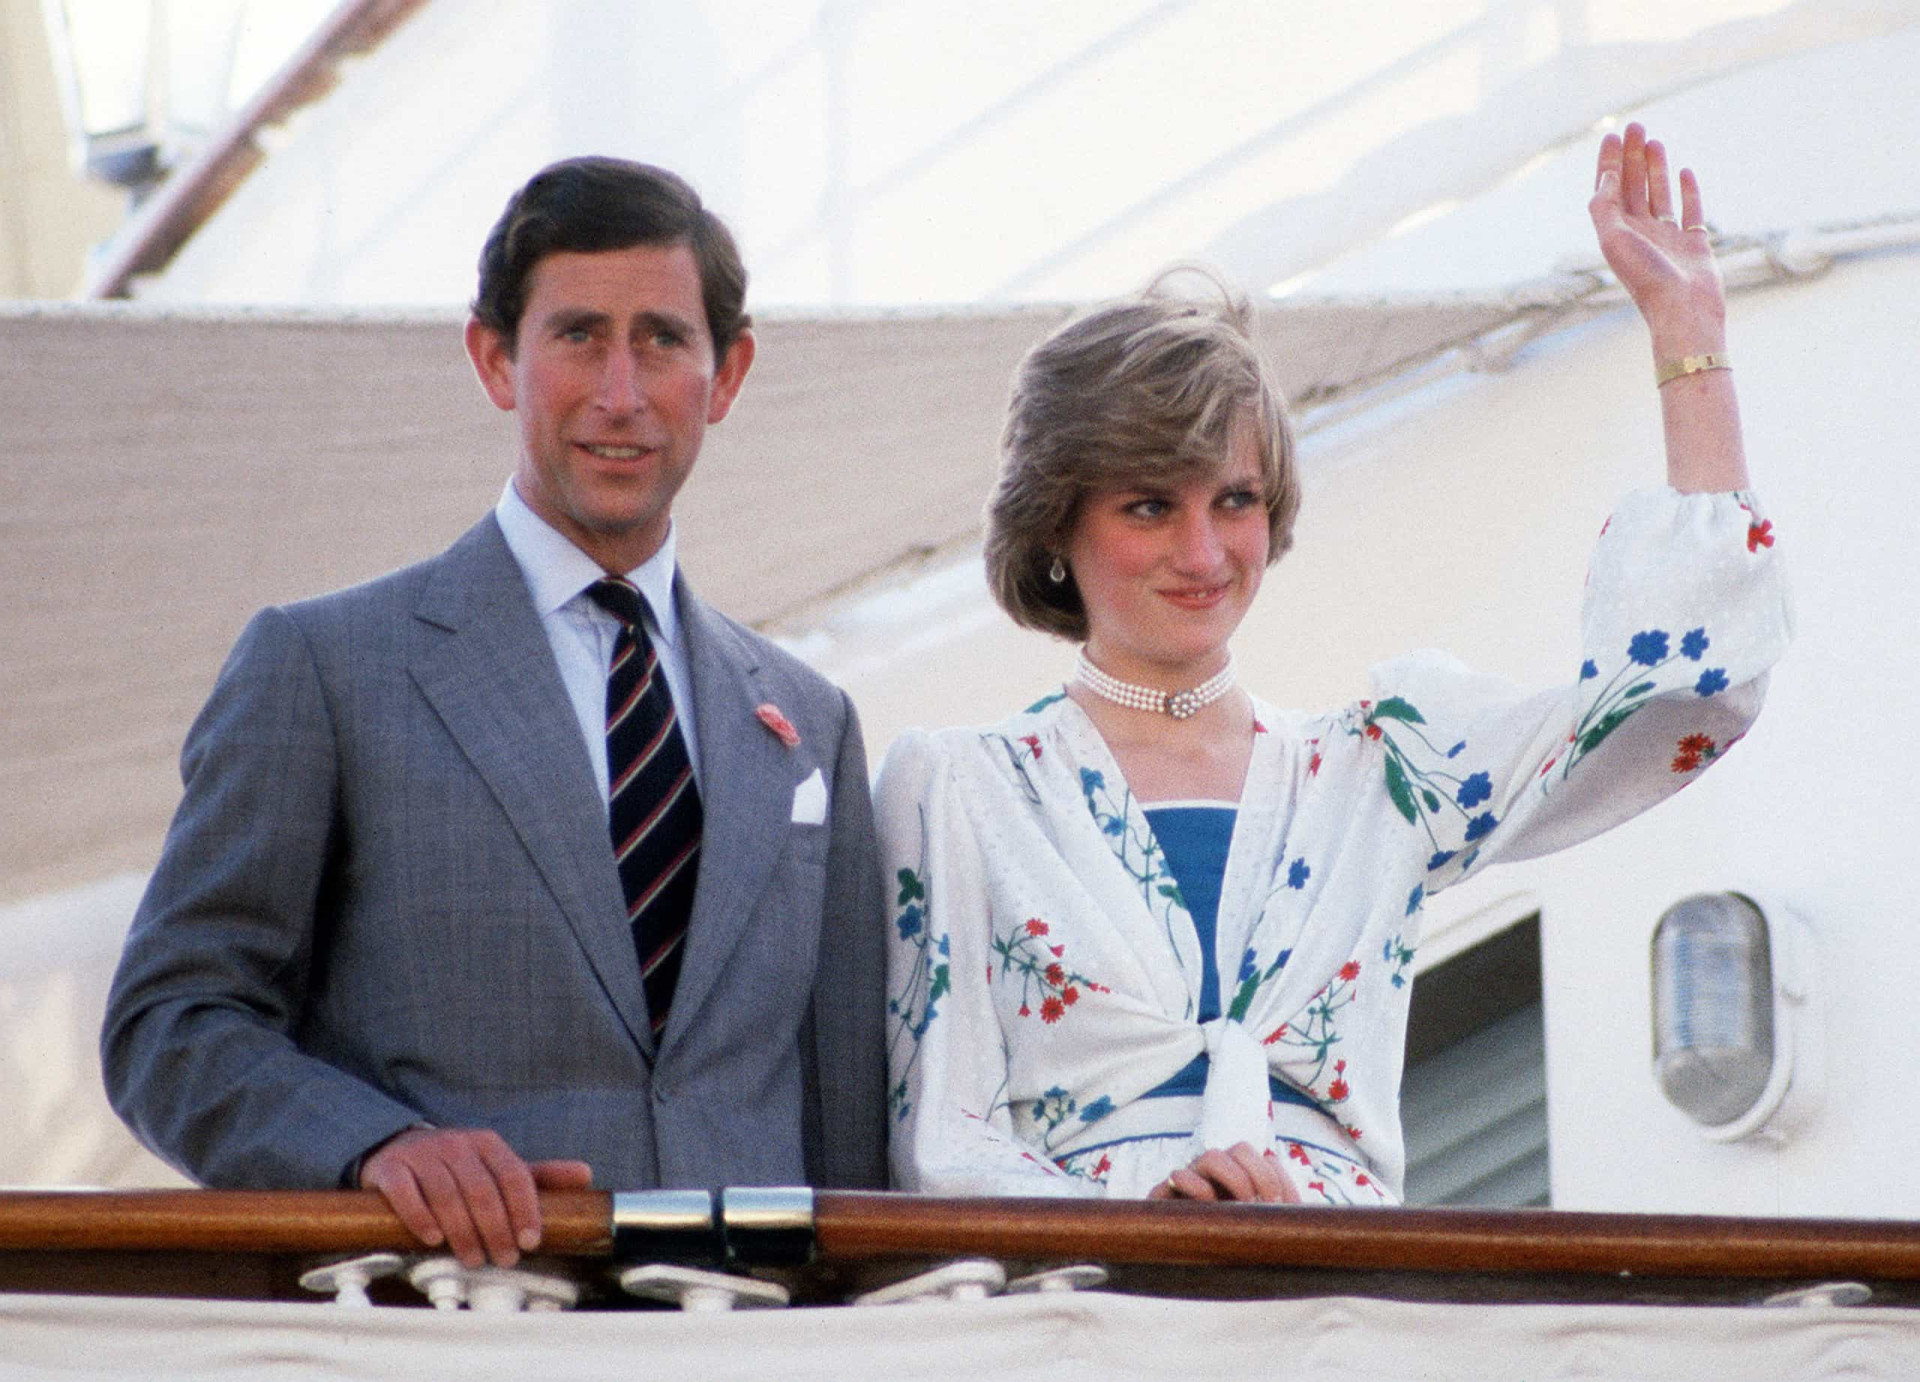 <p>The newly-wedded Prince Charles and <a href="https://www.starsinsider.com/lifestyle/395304/how-princess-dianas-sons-continue-her-legacy-today" rel="noopener">Diana</a>, Princess of Wales leave Gibraltar on <em>Britannia</em> for their honeymoon cruise, which commenced on July 31, 1981.</p><p>You may also like:<a href="https://www.starsinsider.com/n/359032?utm_source=msn.com&utm_medium=display&utm_campaign=referral_description&utm_content=474709v3en-us"> Ces acteurs ont détesté leur personnage à l'écran</a></p>